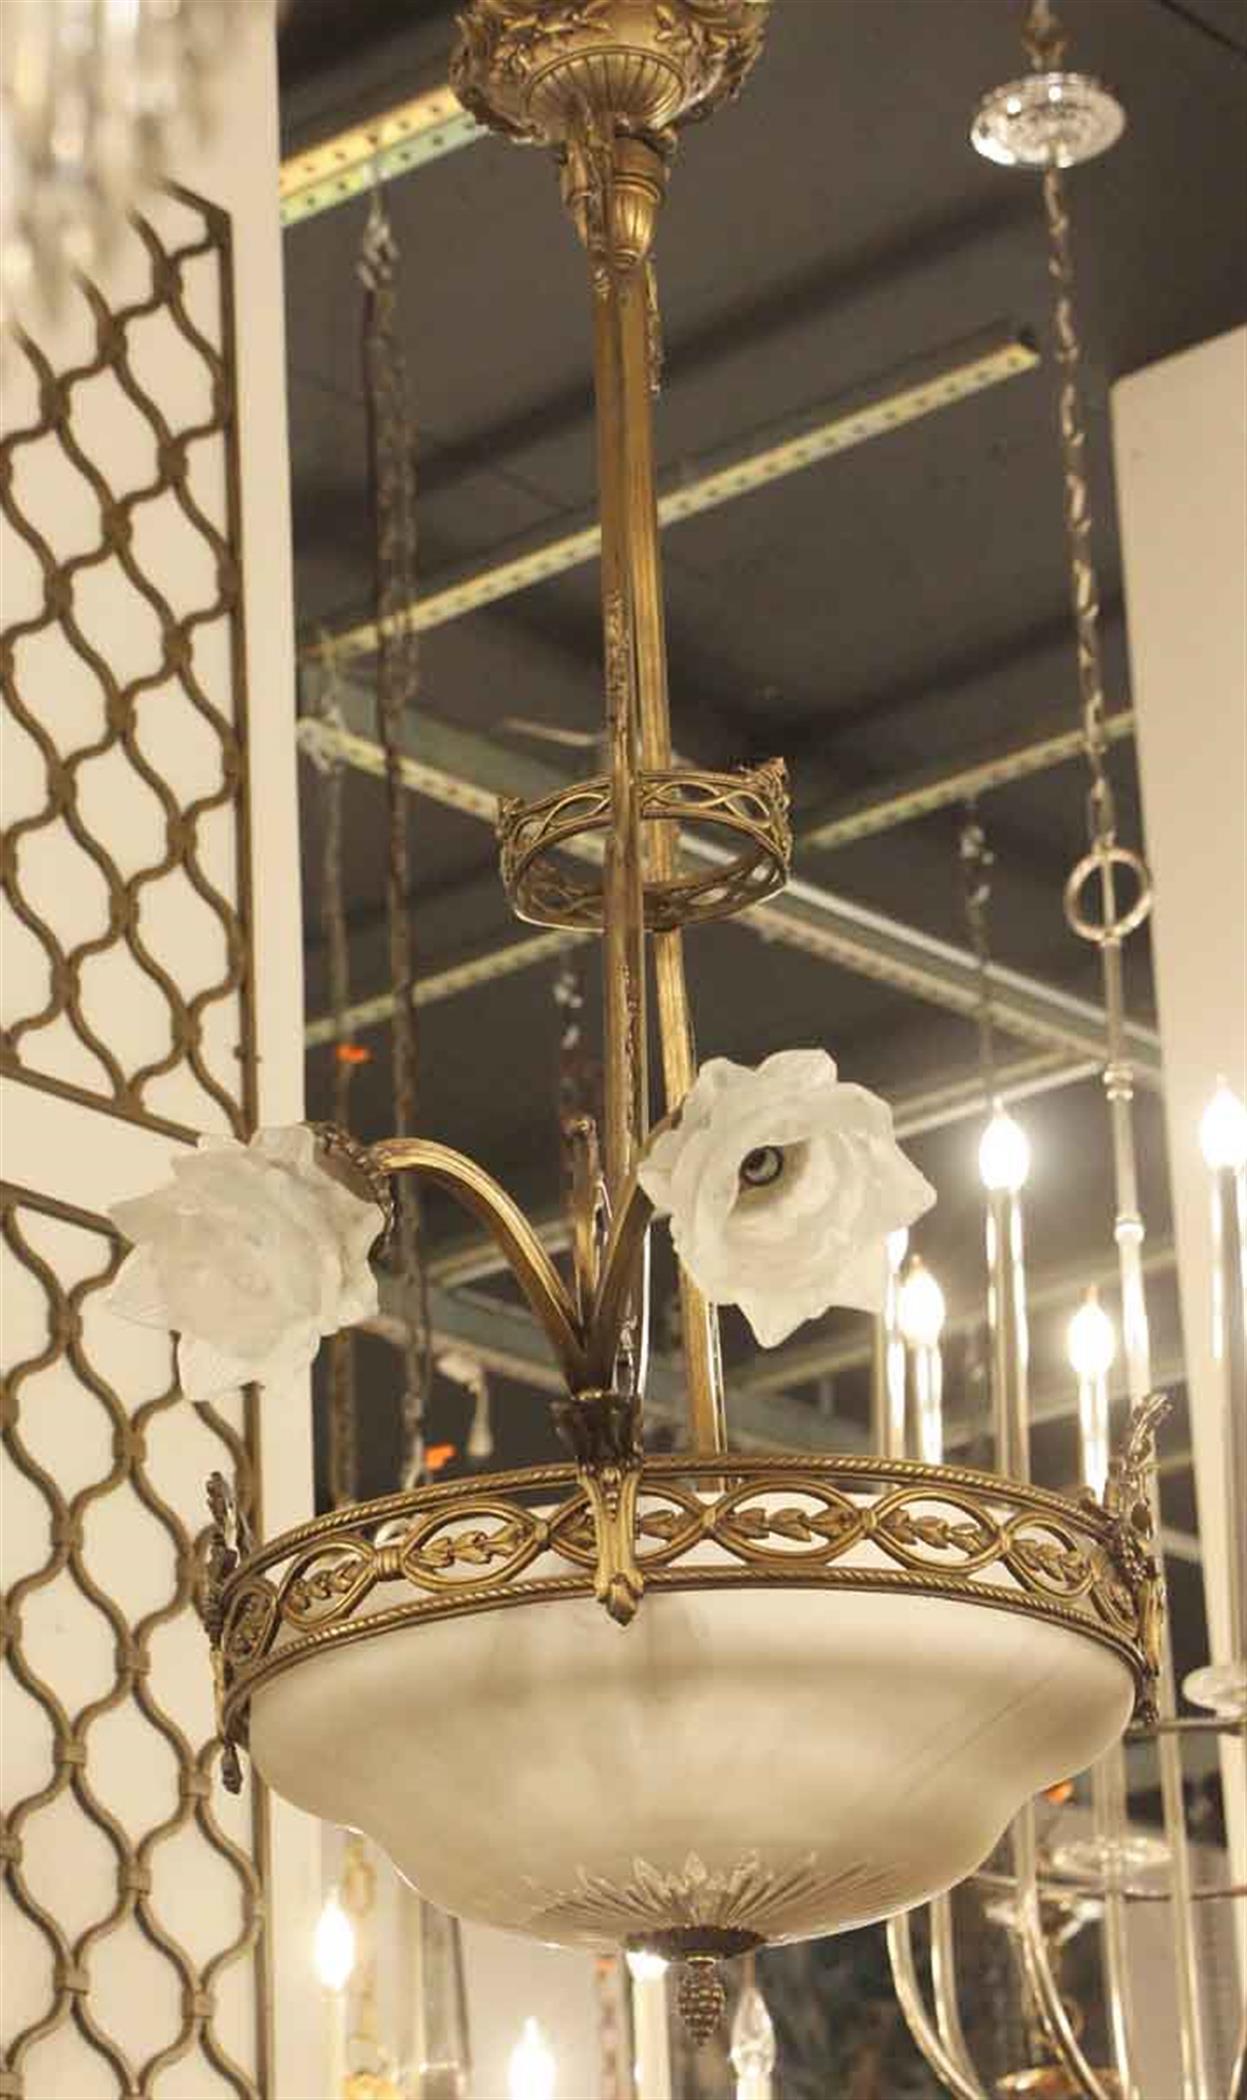 1920s bronze and glass dome shaped pendant light with four floral frosted glass shades and decorative leaf and floral detail. This can be seen at our 2420 Broadway location on the upper west side in Manhattan.